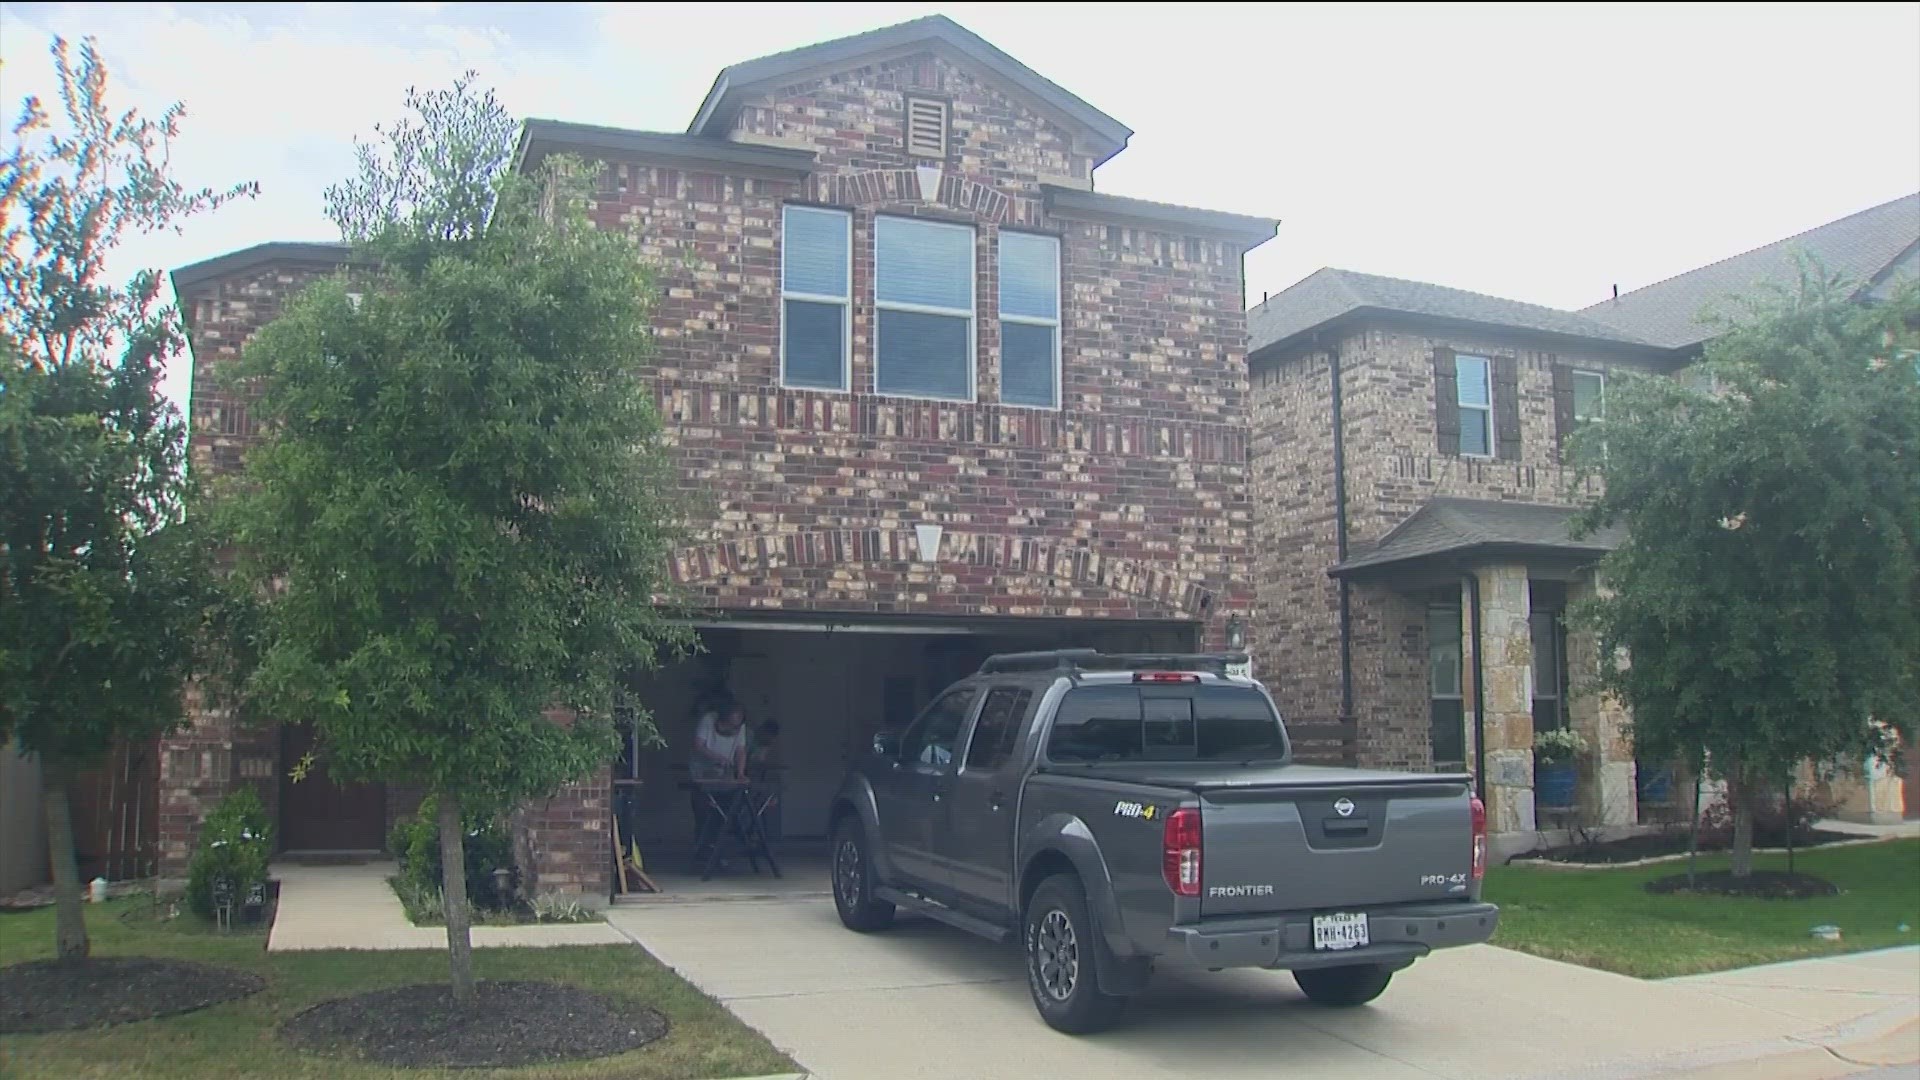 The Austin City Council passed a controversial zoning proposal known as the HOME Initiative Thursday night. KVUE's Melia Masumoto has the details.